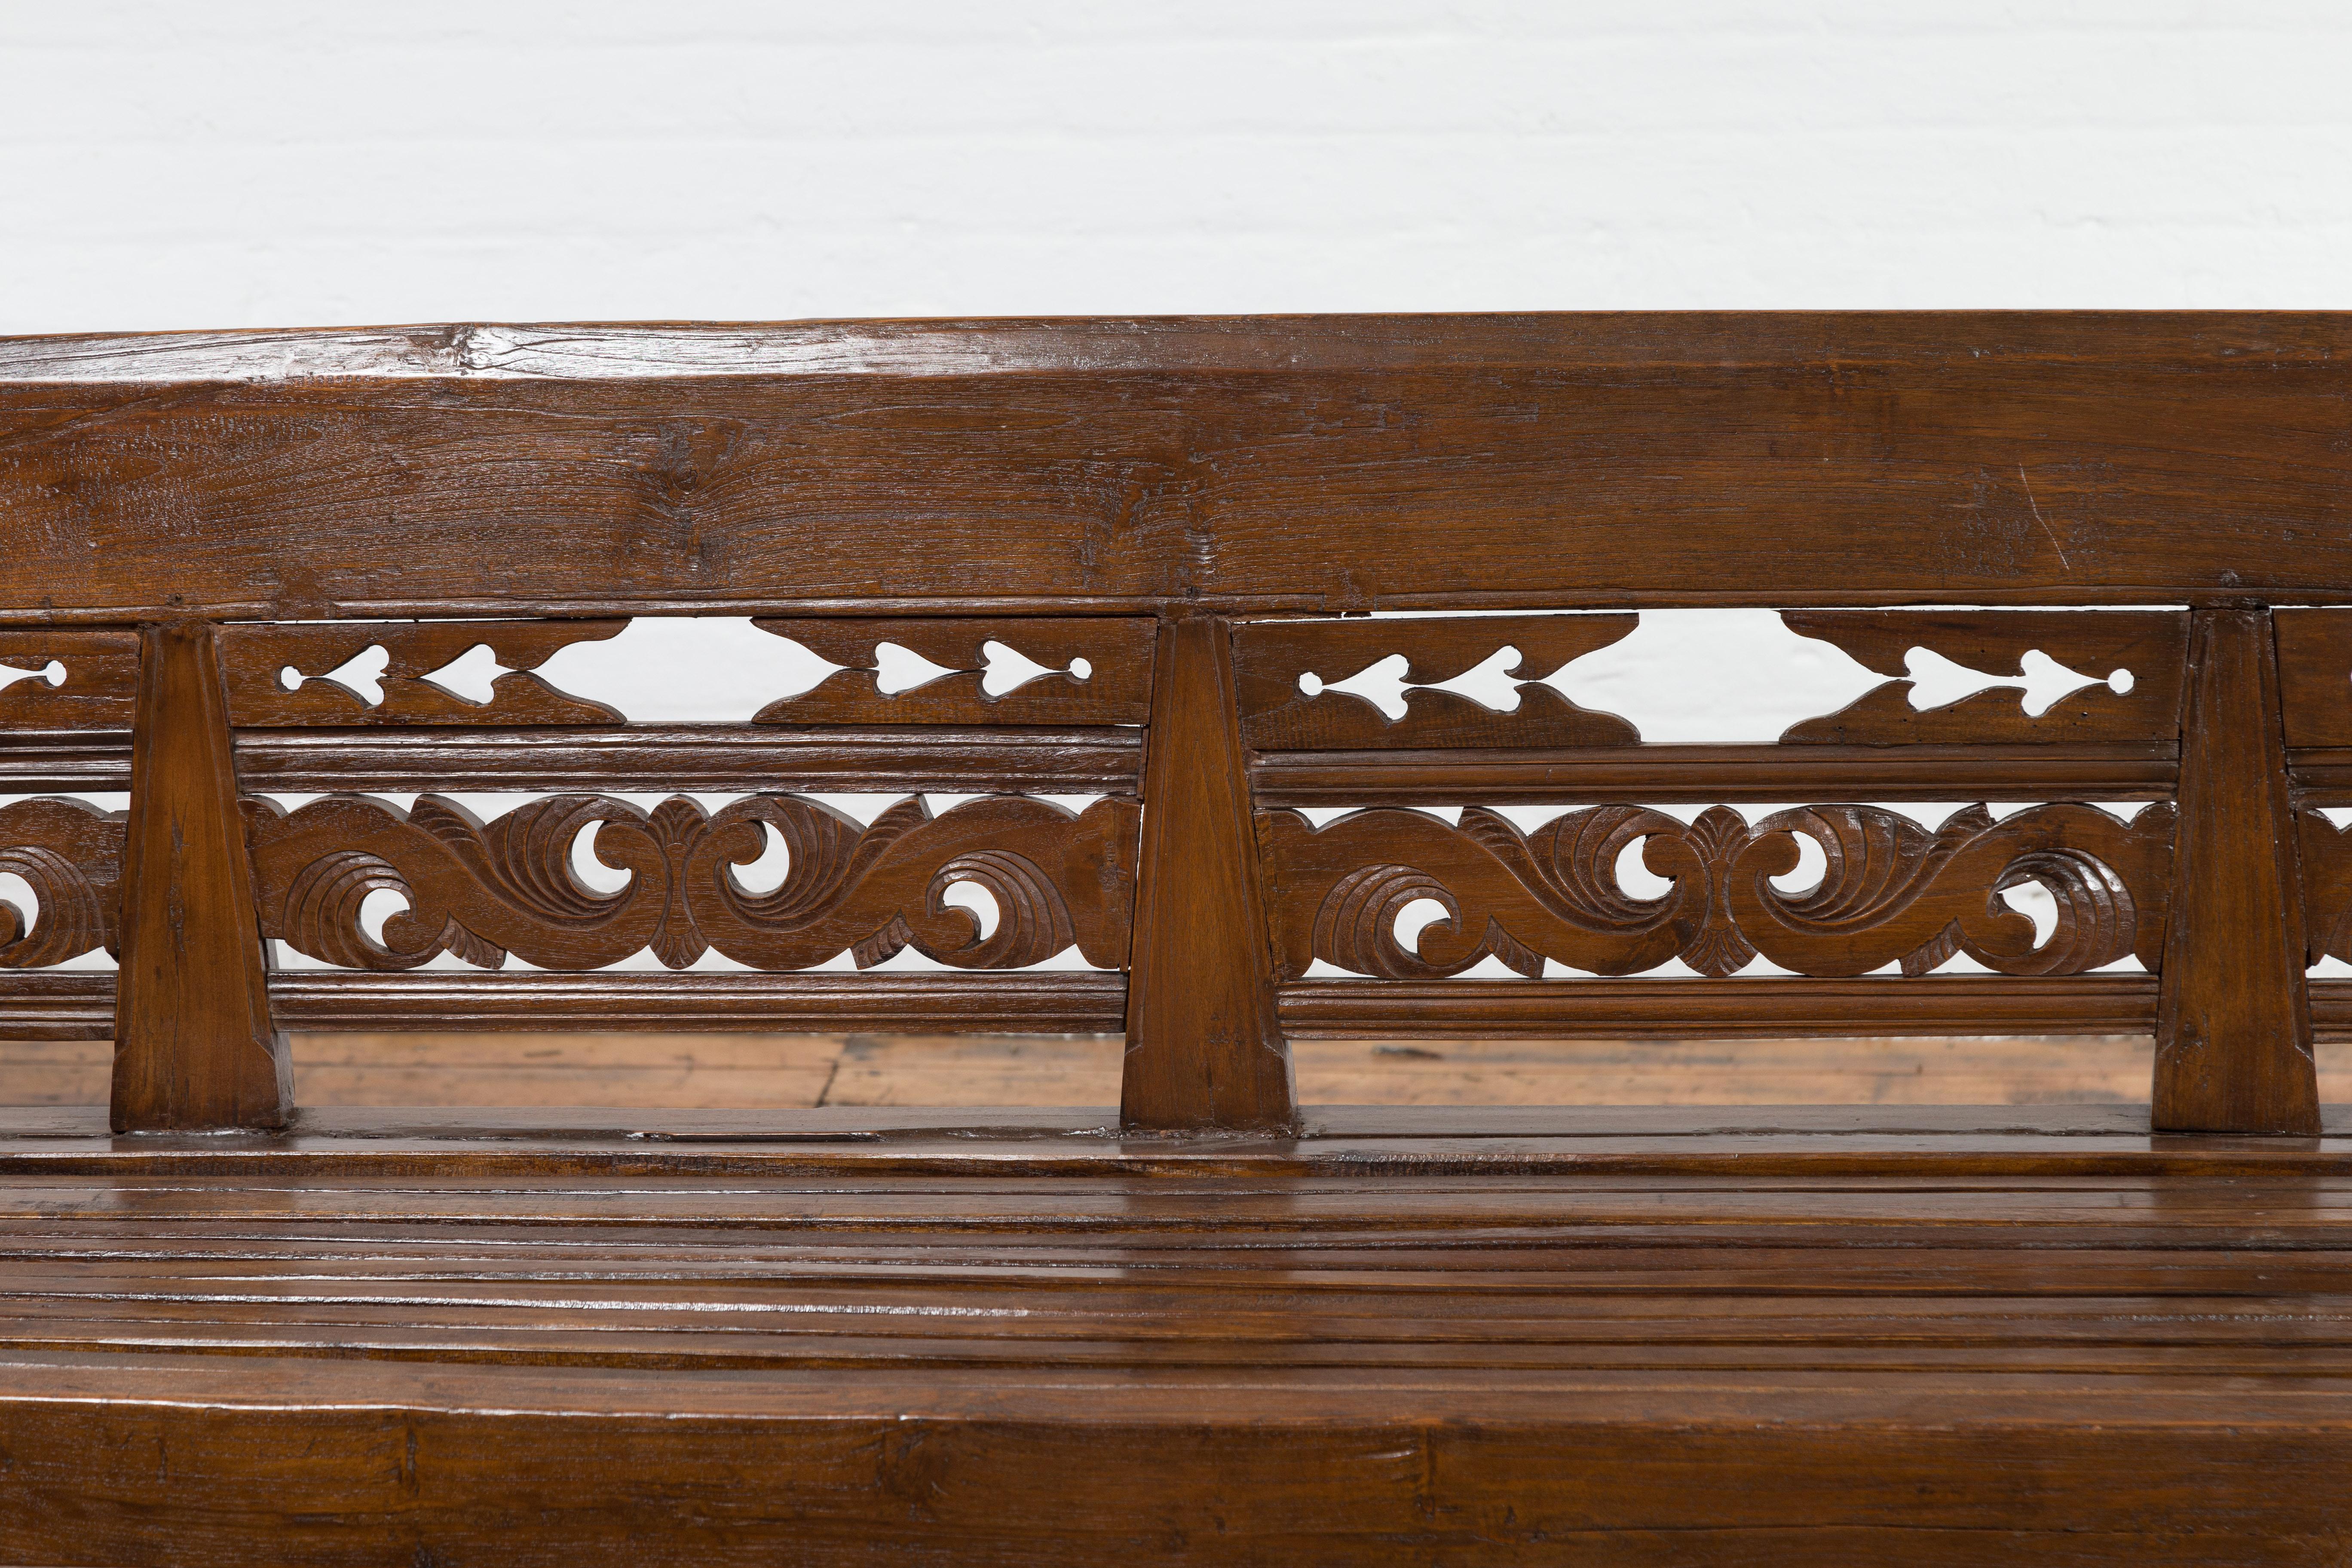 Hand-Carved Hand Carved Teak Wood Settee with Scrolling Foliage and Turned Legs